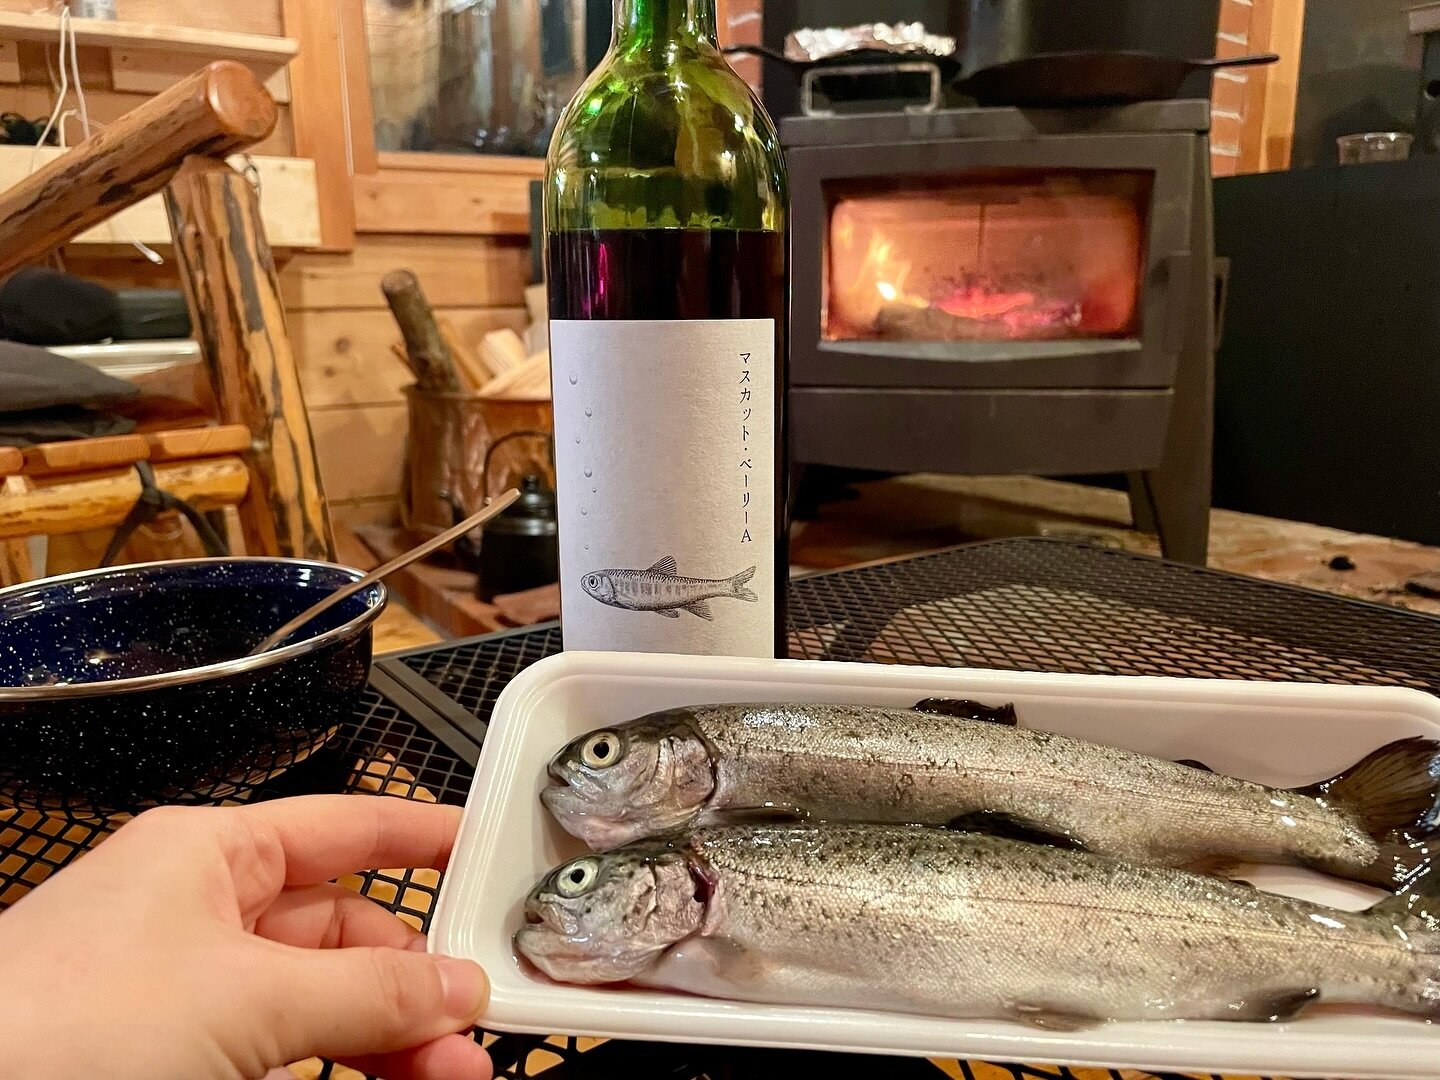 Local fish matches the local wine.